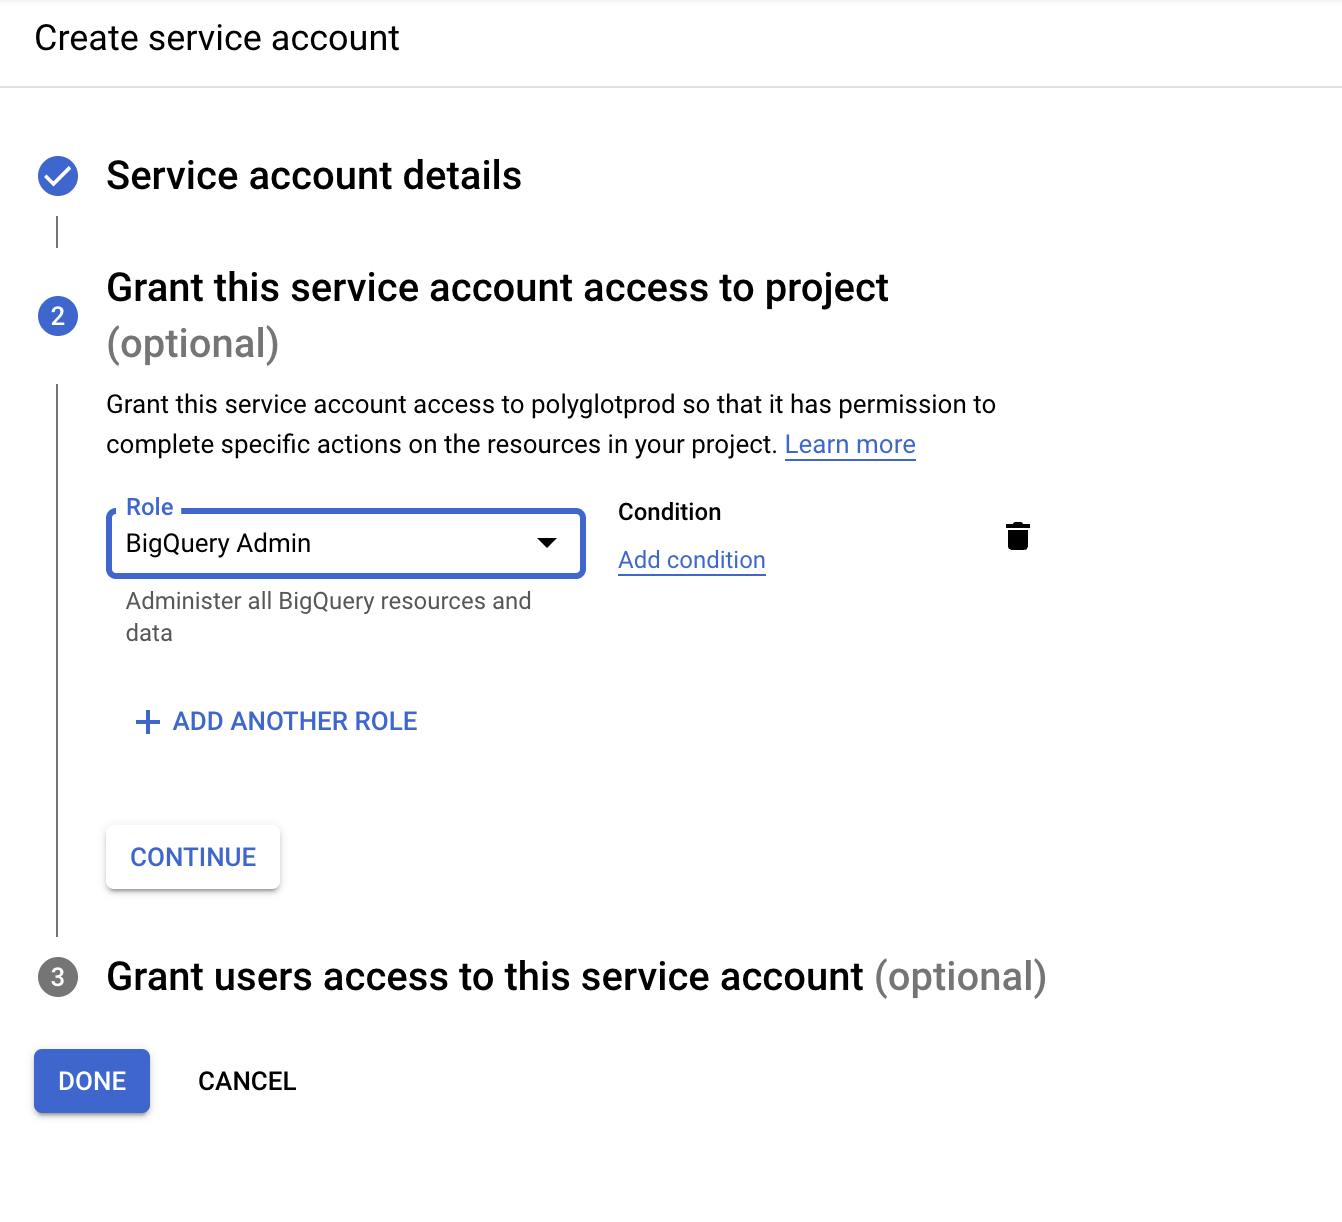 +Create Service Account Page Details